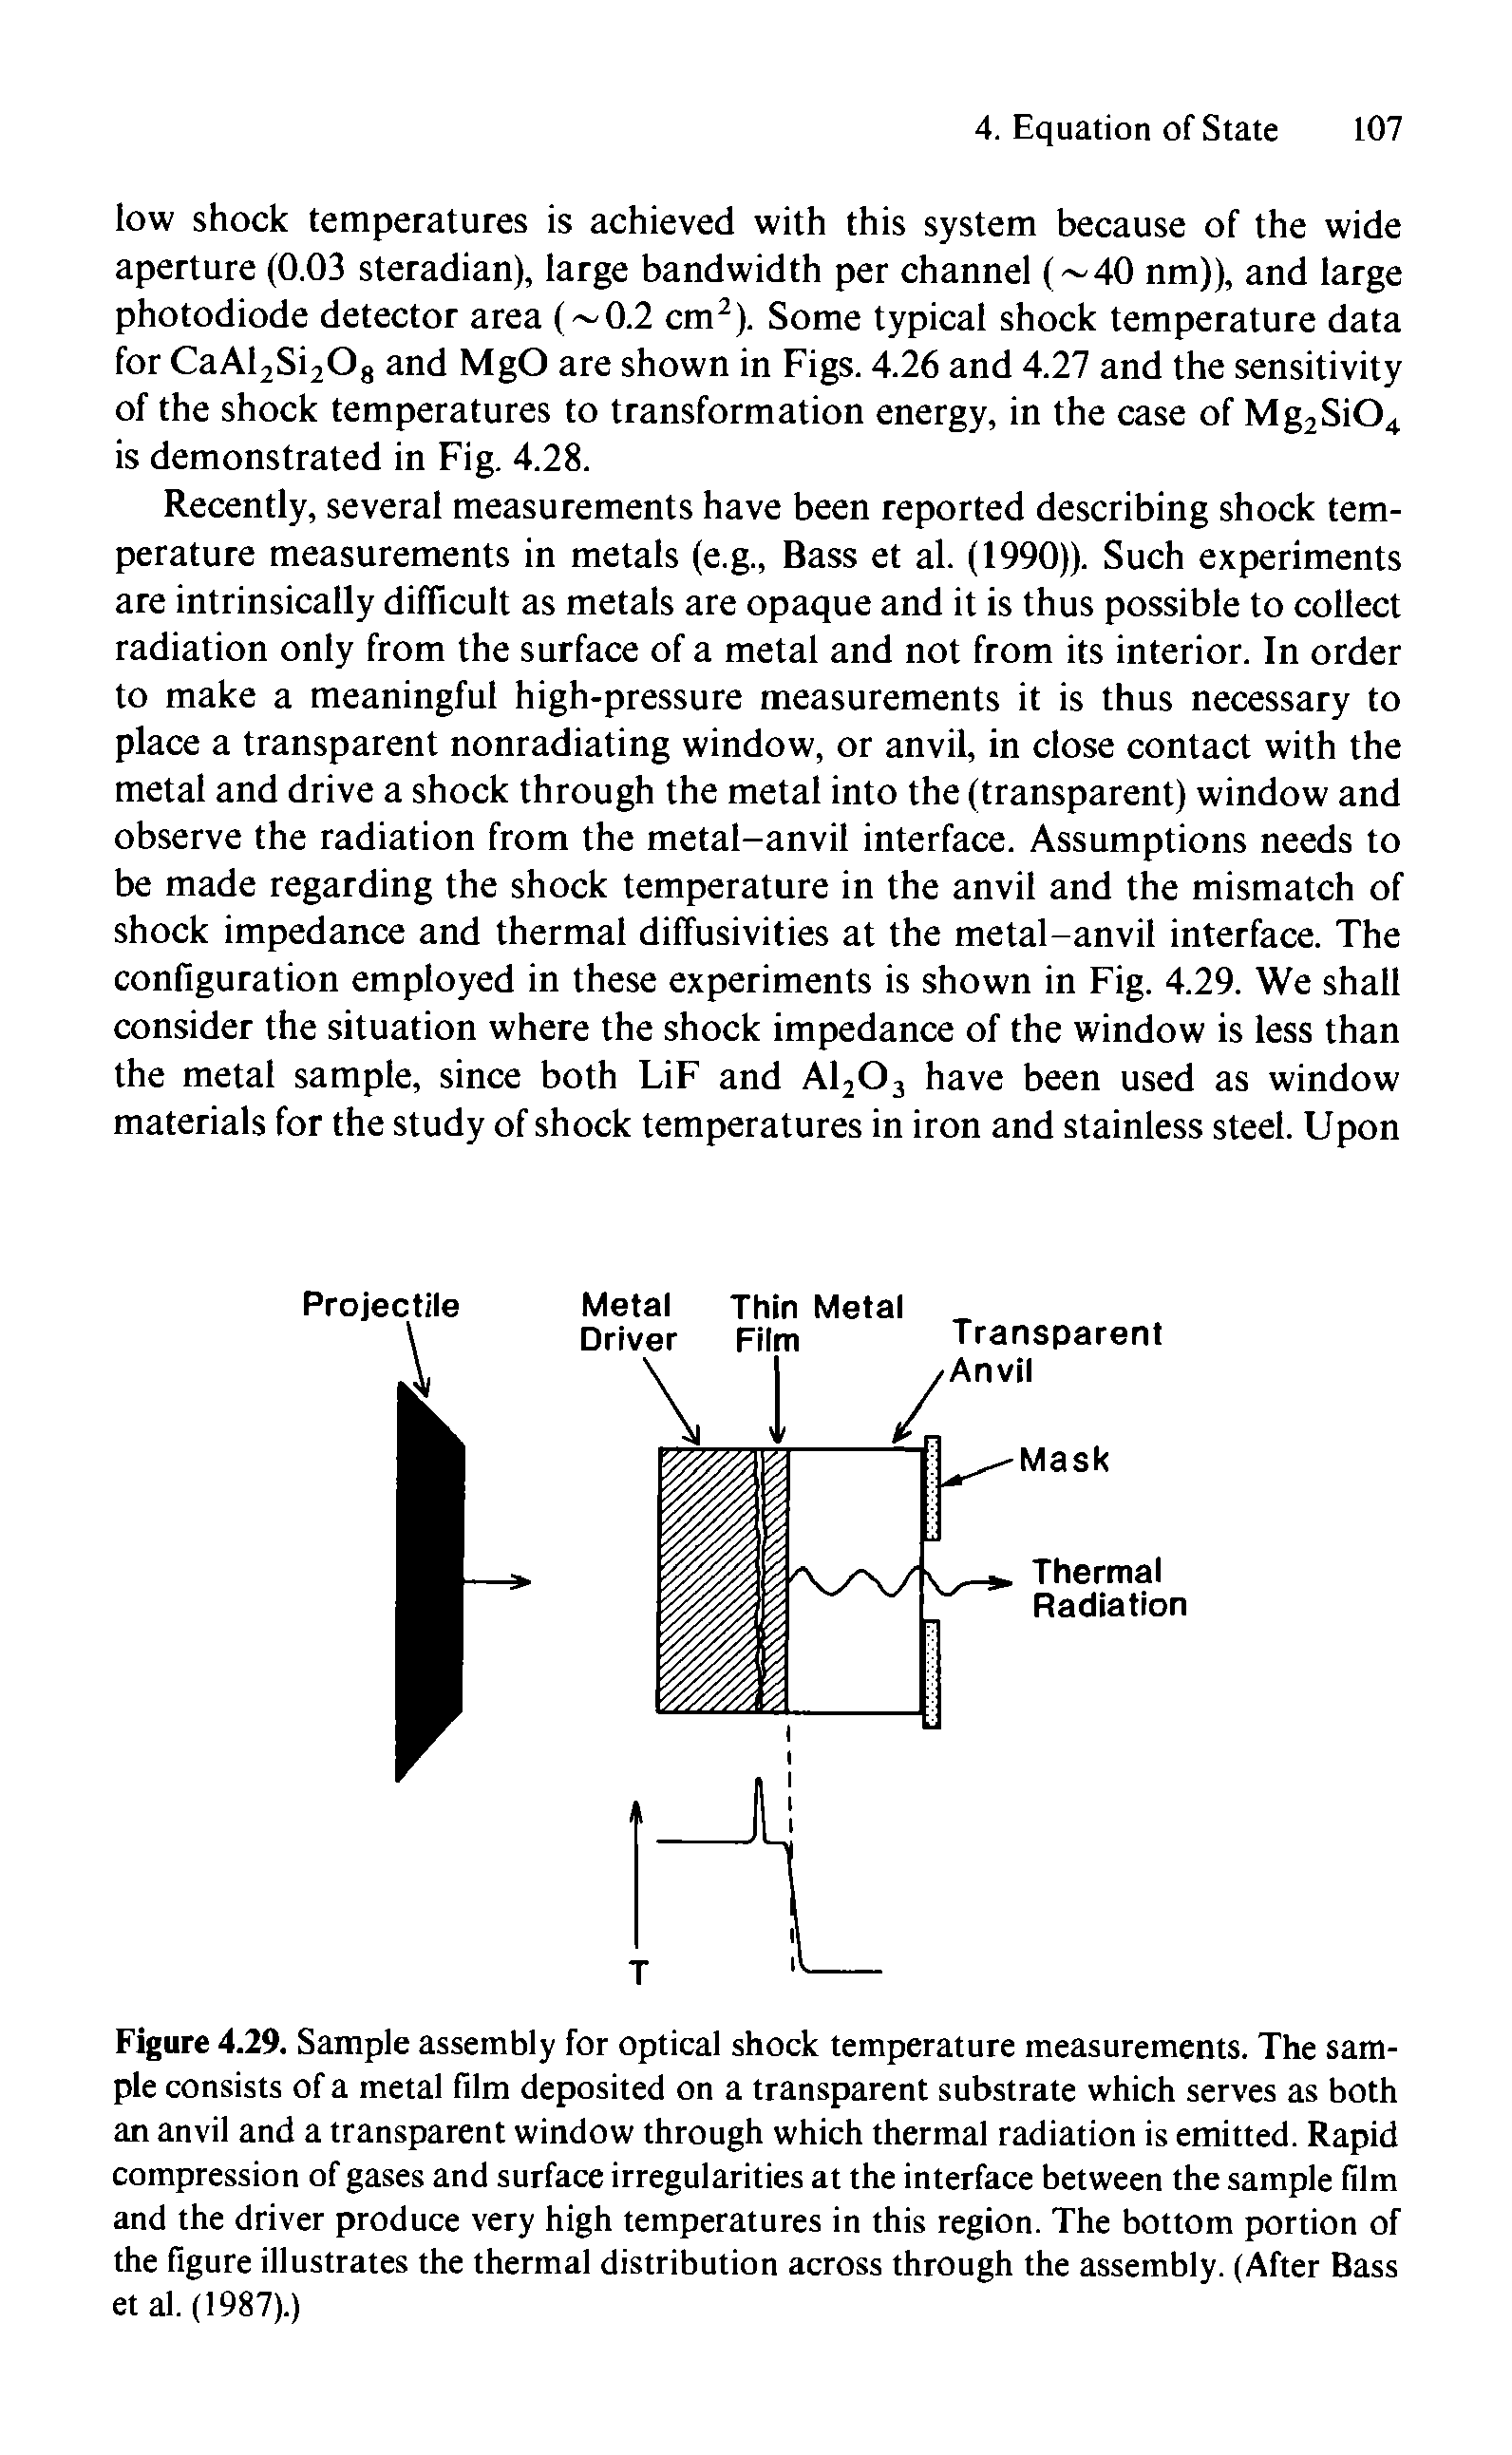 Figure 4.29. Sample assembly for optical shock temperature measurements. The sample consists of a metal film deposited on a transparent substrate which serves as both an anvil and a transparent window through which thermal radiation is emitted. Rapid compression of gases and surface irregularities at the interface between the sample film and the driver produce very high temperatures in this region. The bottom portion of the figure illustrates the thermal distribution across through the assembly. (After Bass et al. (1987).)...